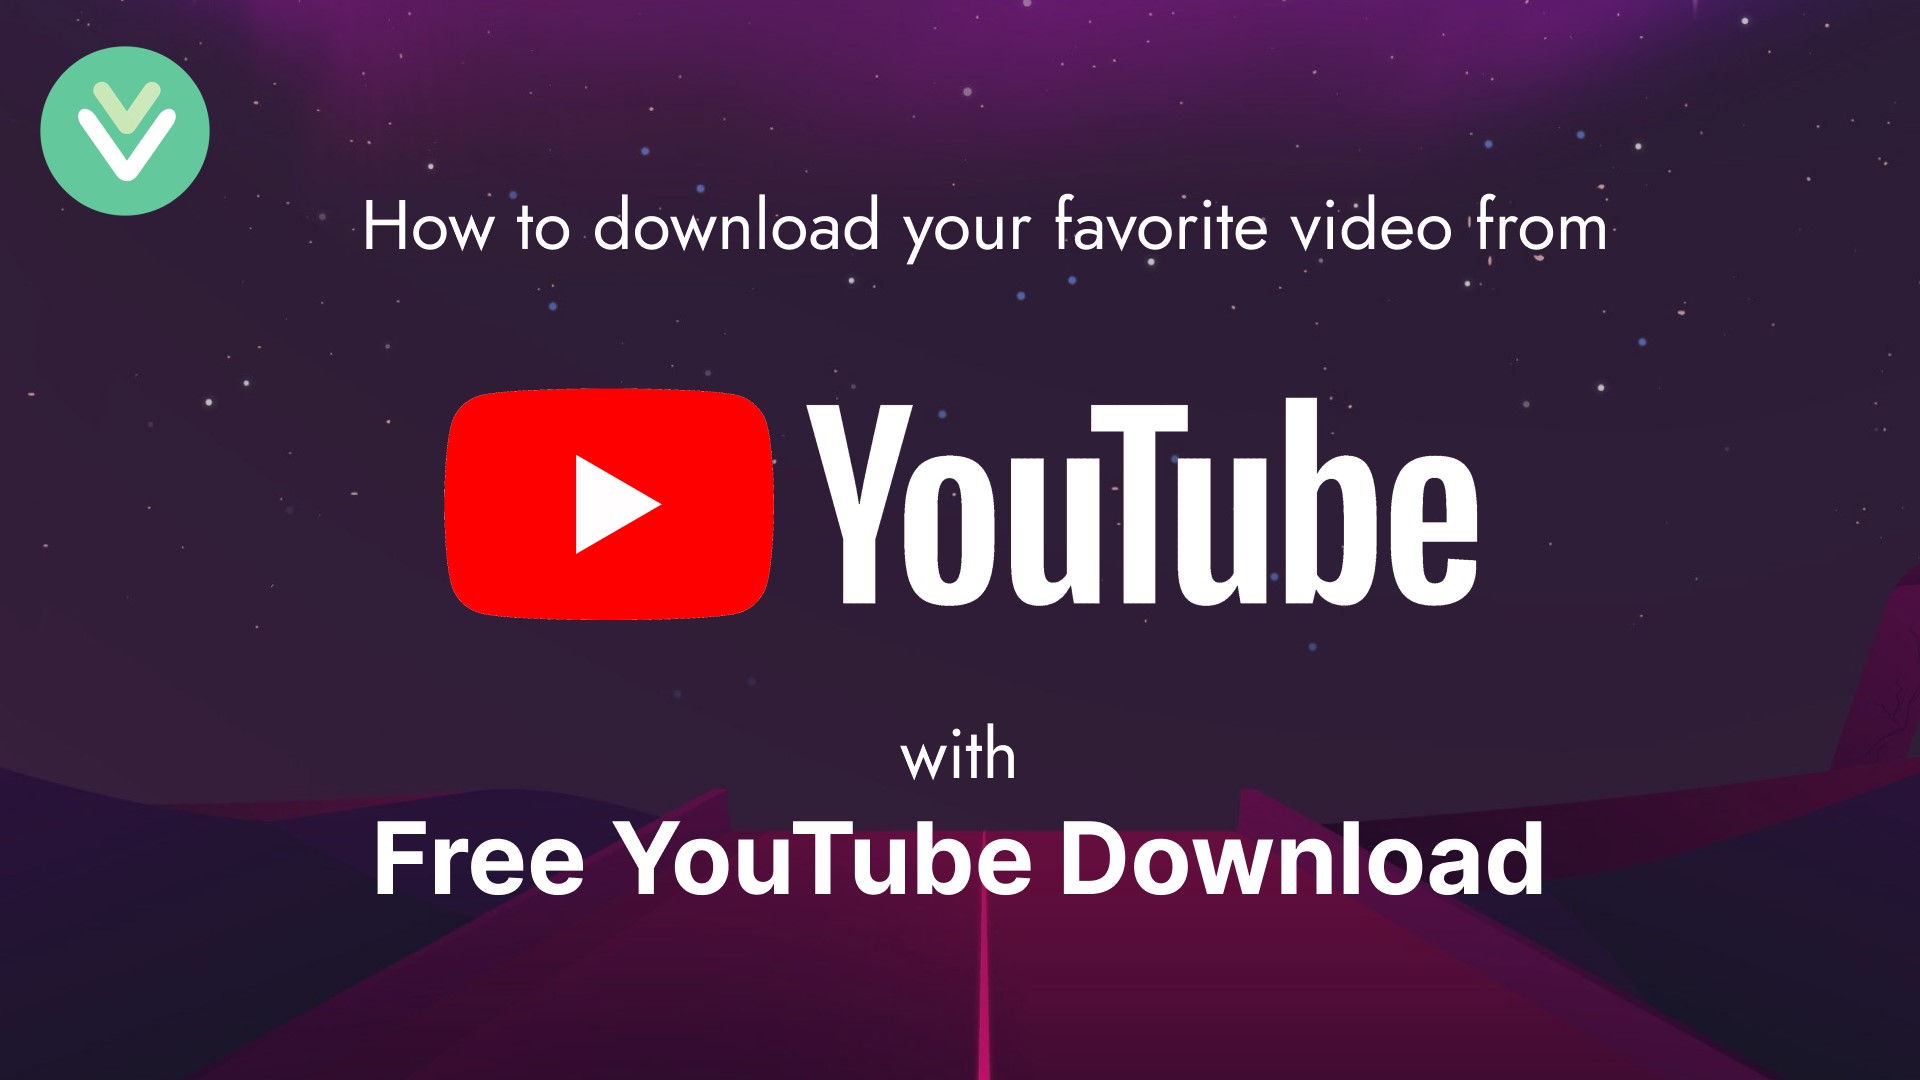 How to download your favorite videos, music or films from YouTube with Free YouTube Download